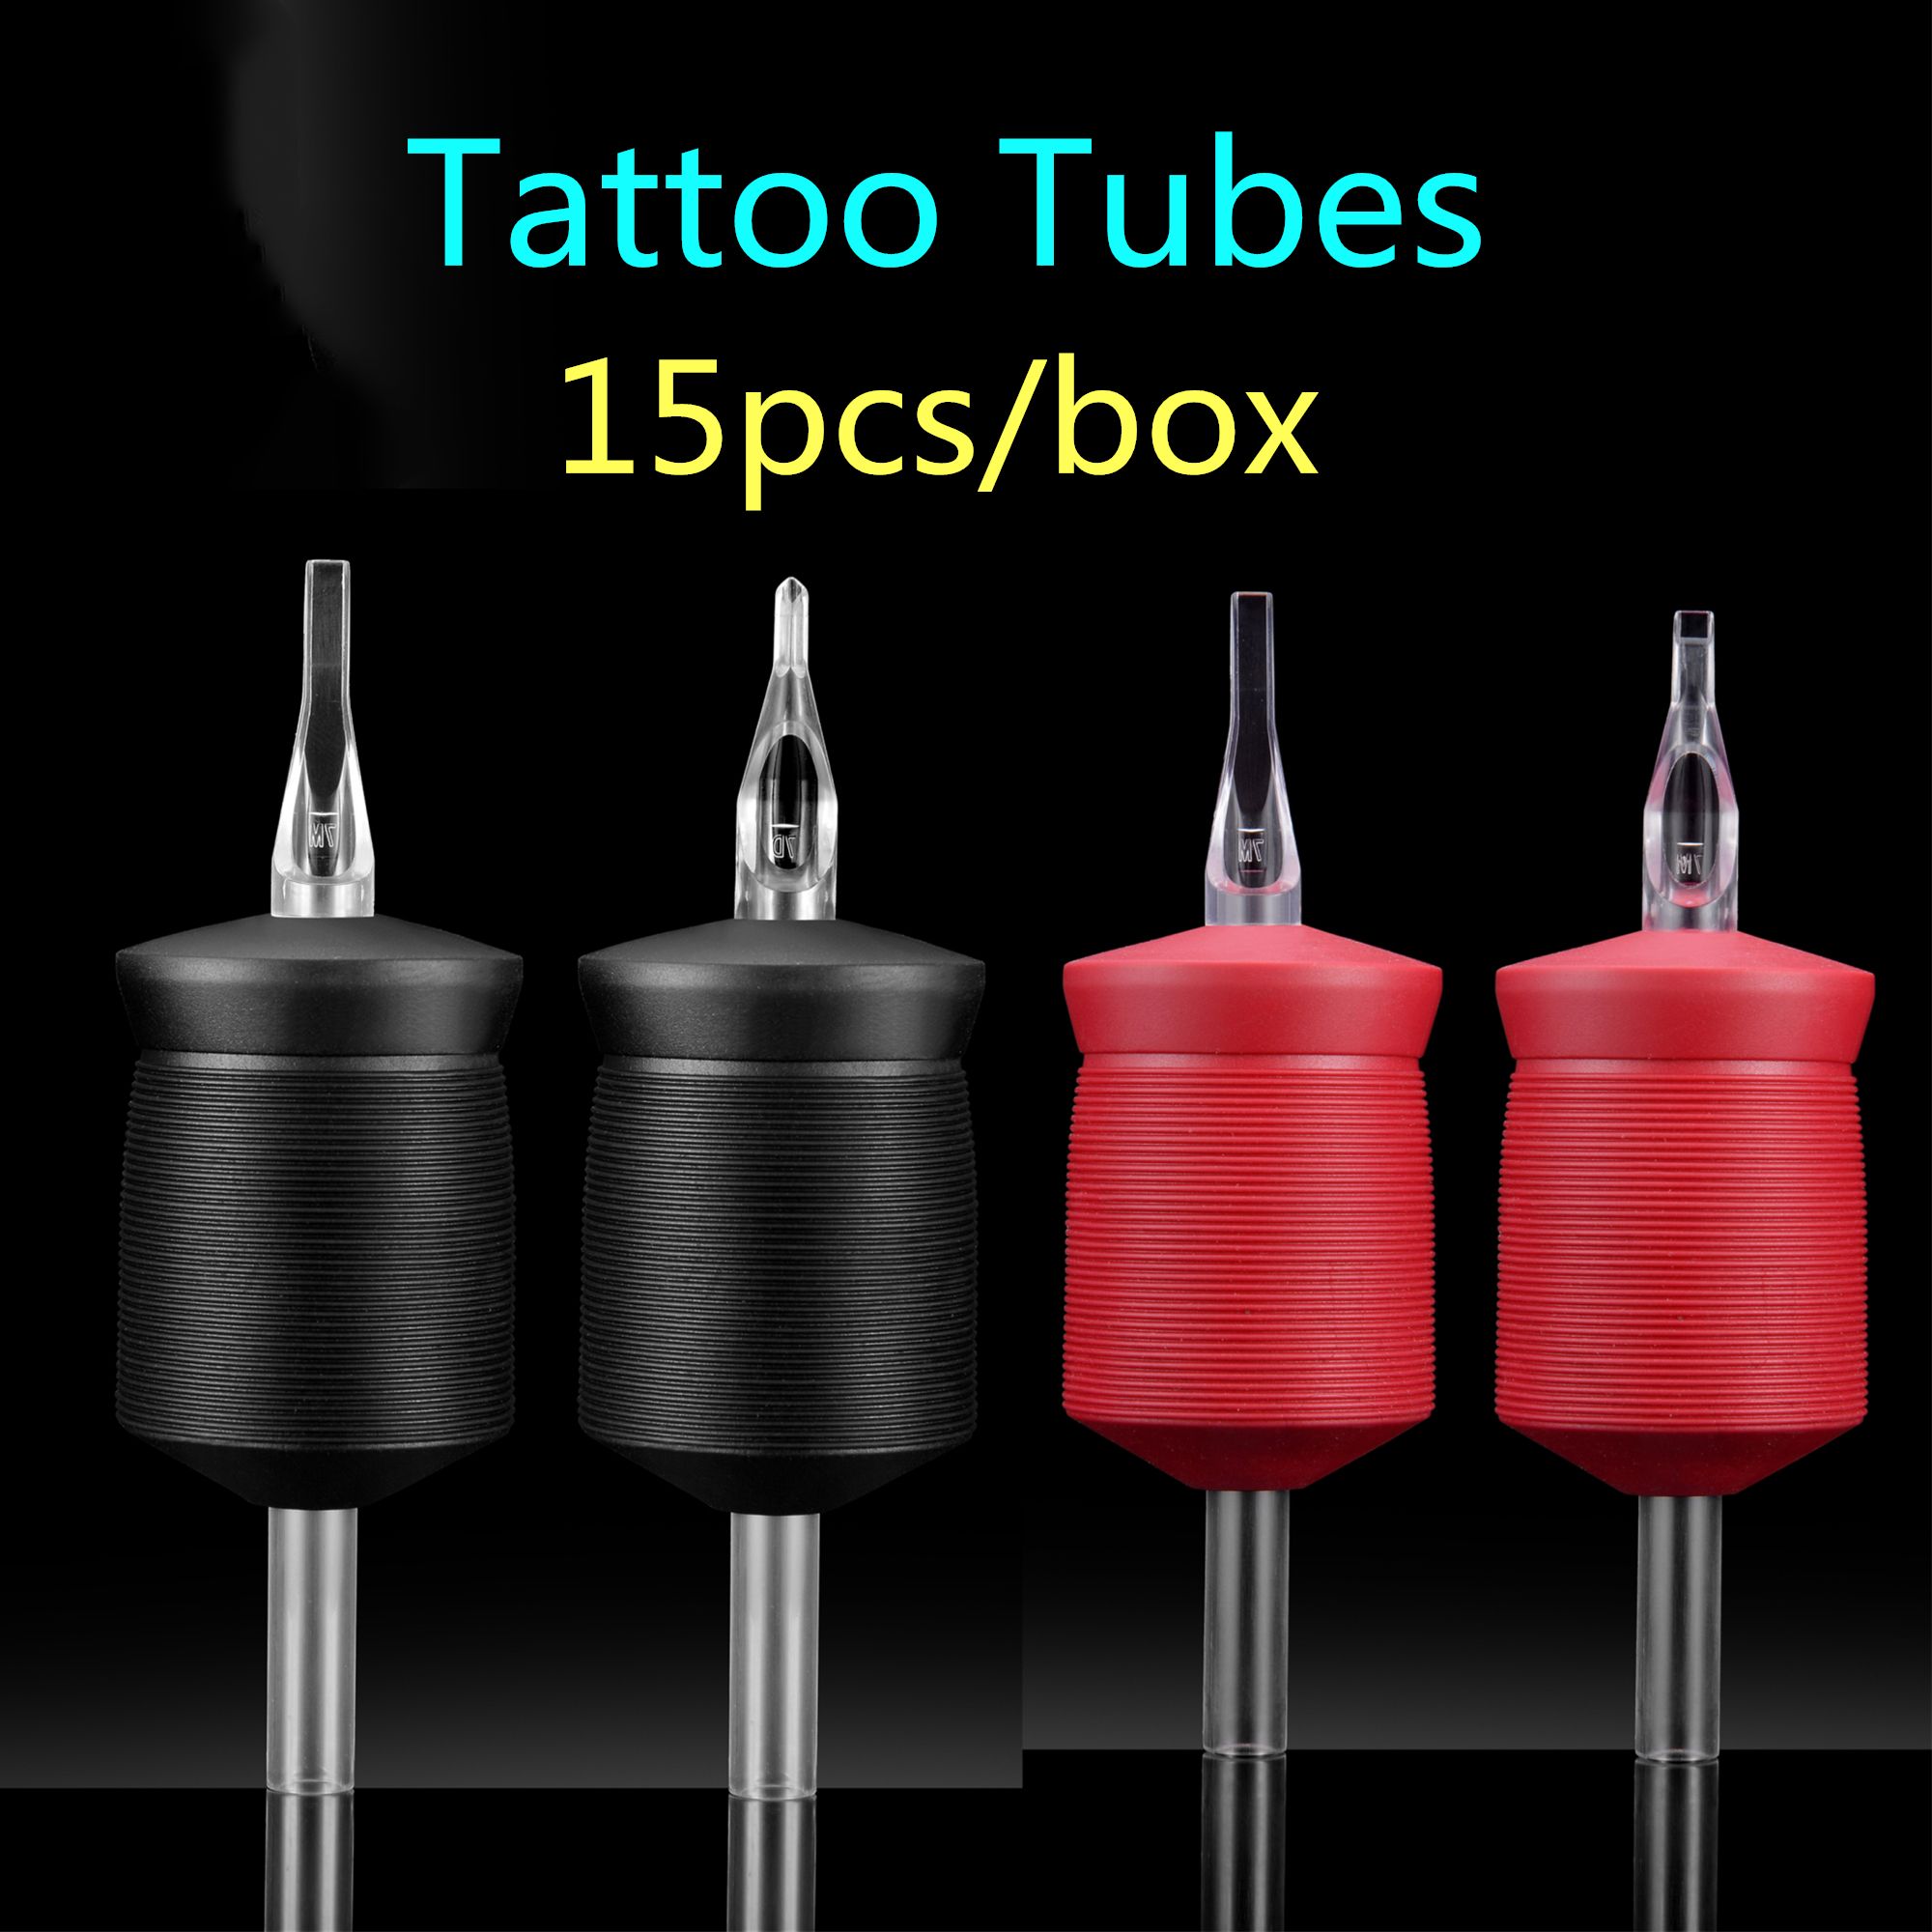 XL Memory Foam Tattoo Grip Covers For Any Stainless Steel And Disposable 1  Tattoo Tube Grips 10 Pcs